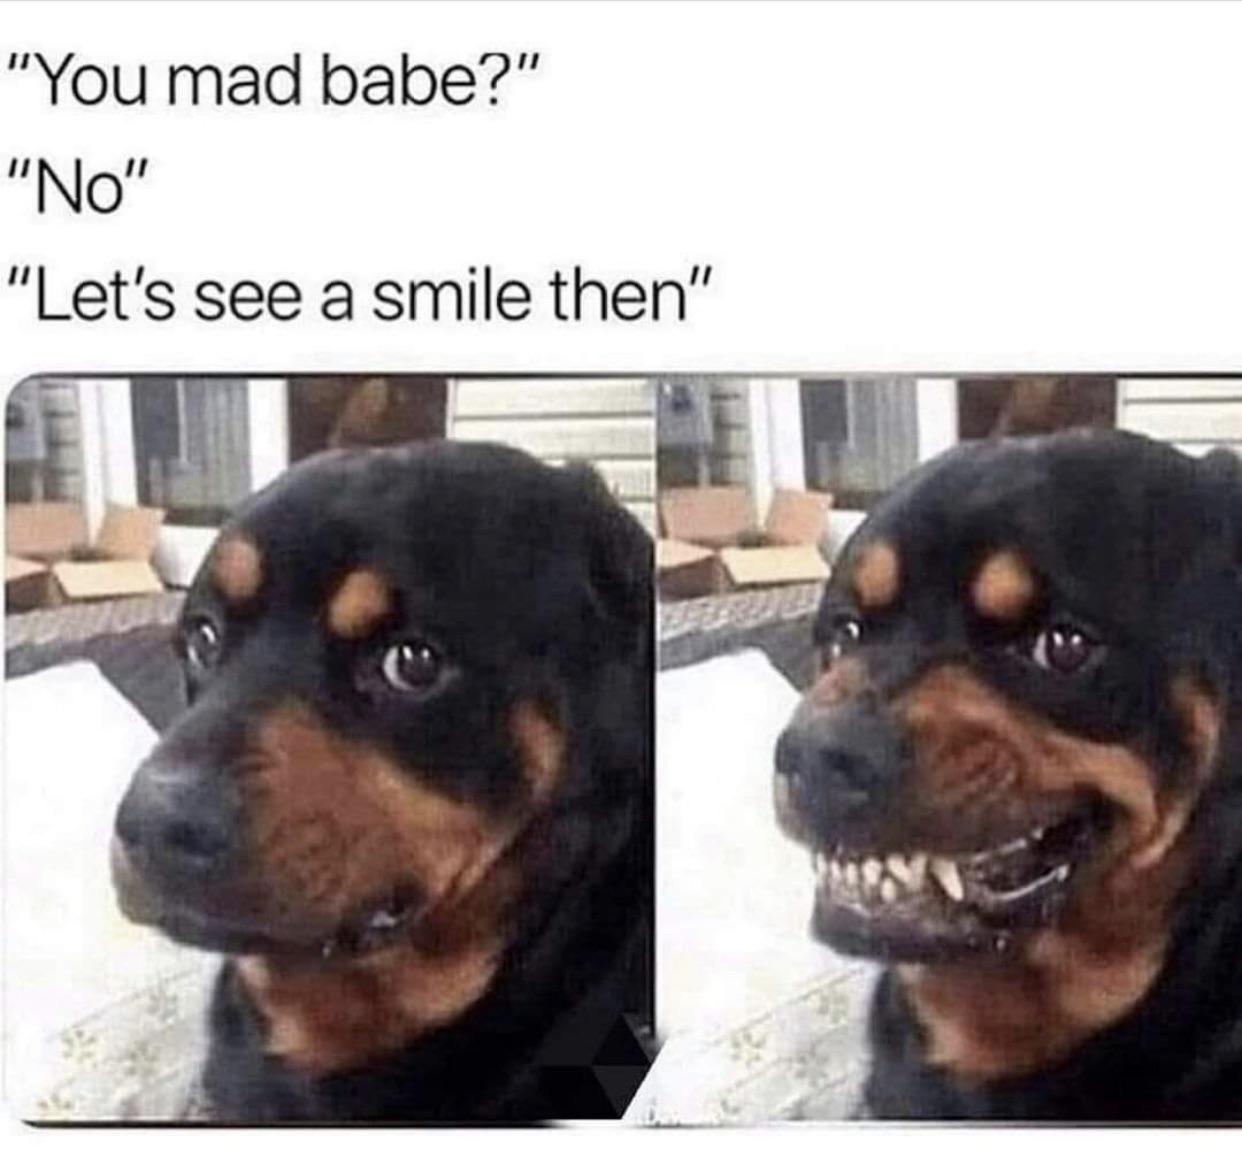 dank memes - babe mad memes - "You mad babe?" "No" "Let's see a smile then"